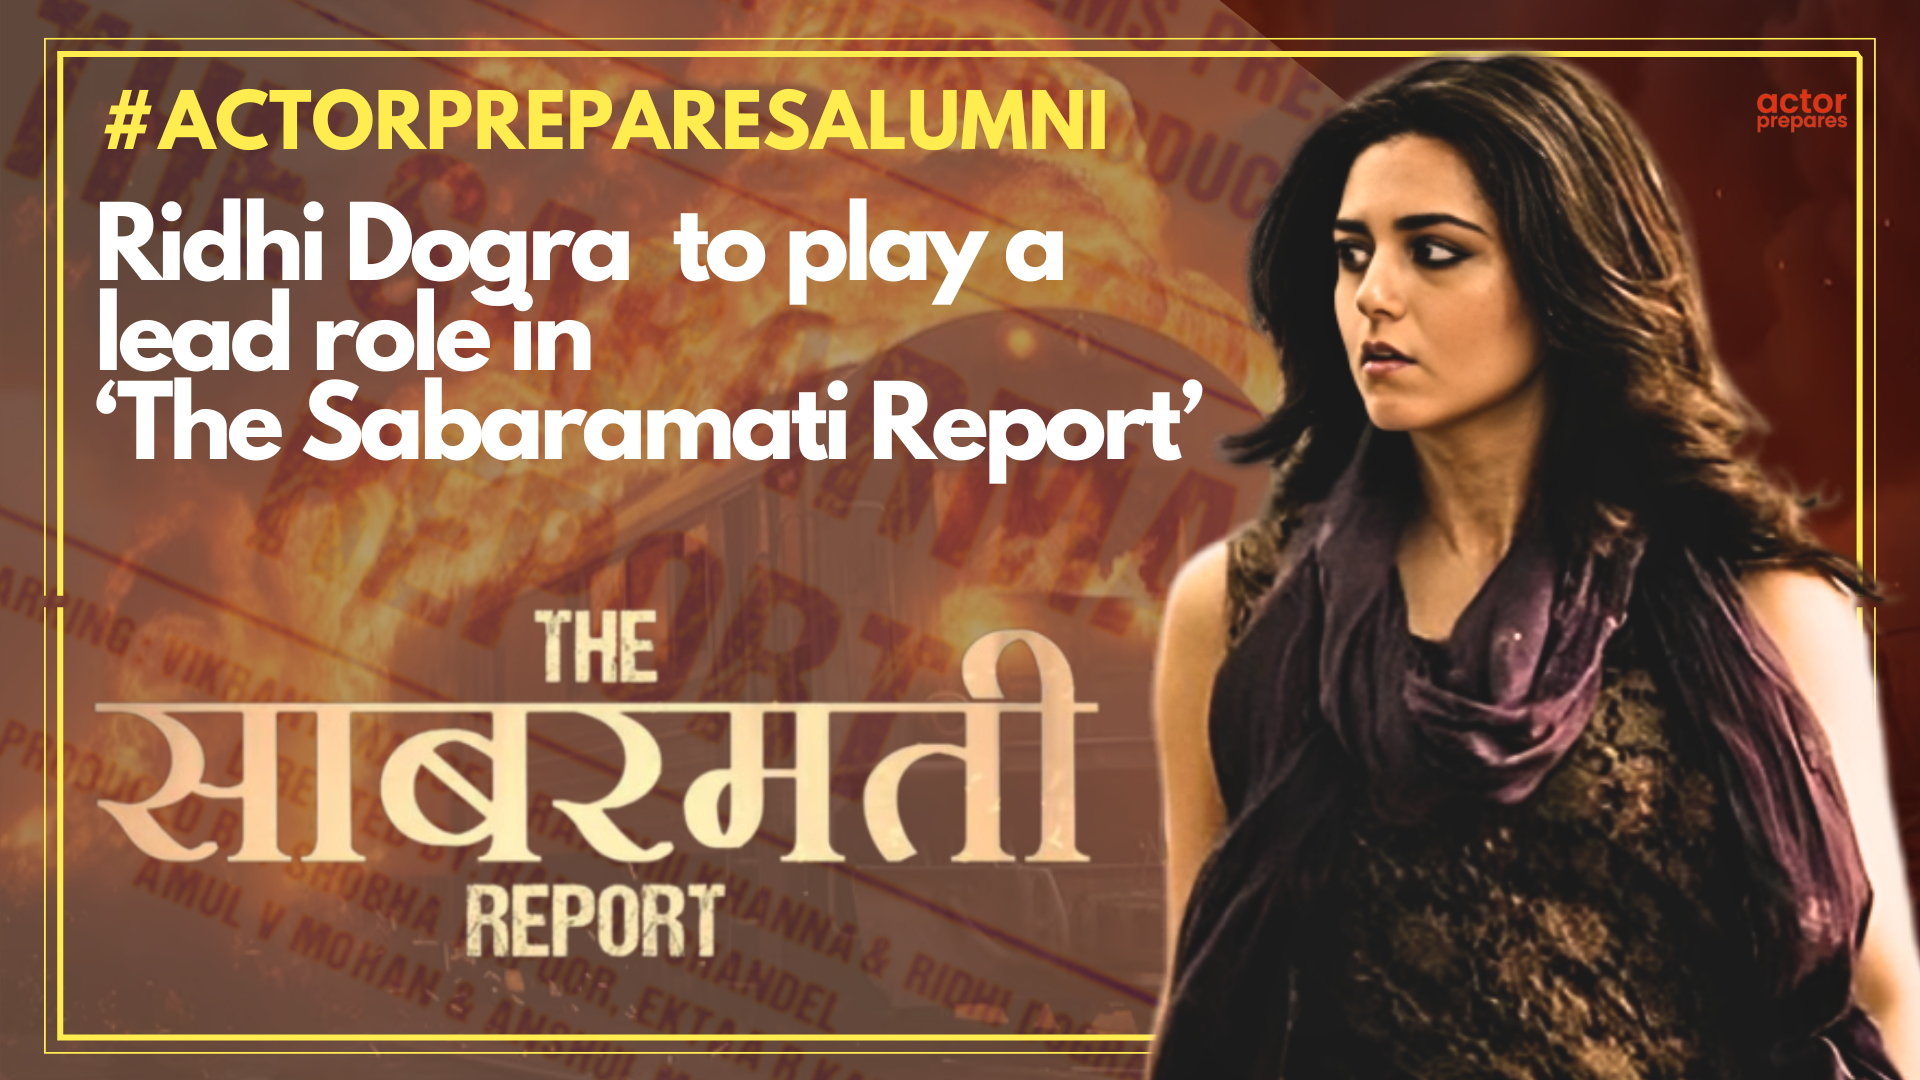 Talented Actress Riddhi Dogra Set to Shine in Lead Role in 'The Sabarmati Report'